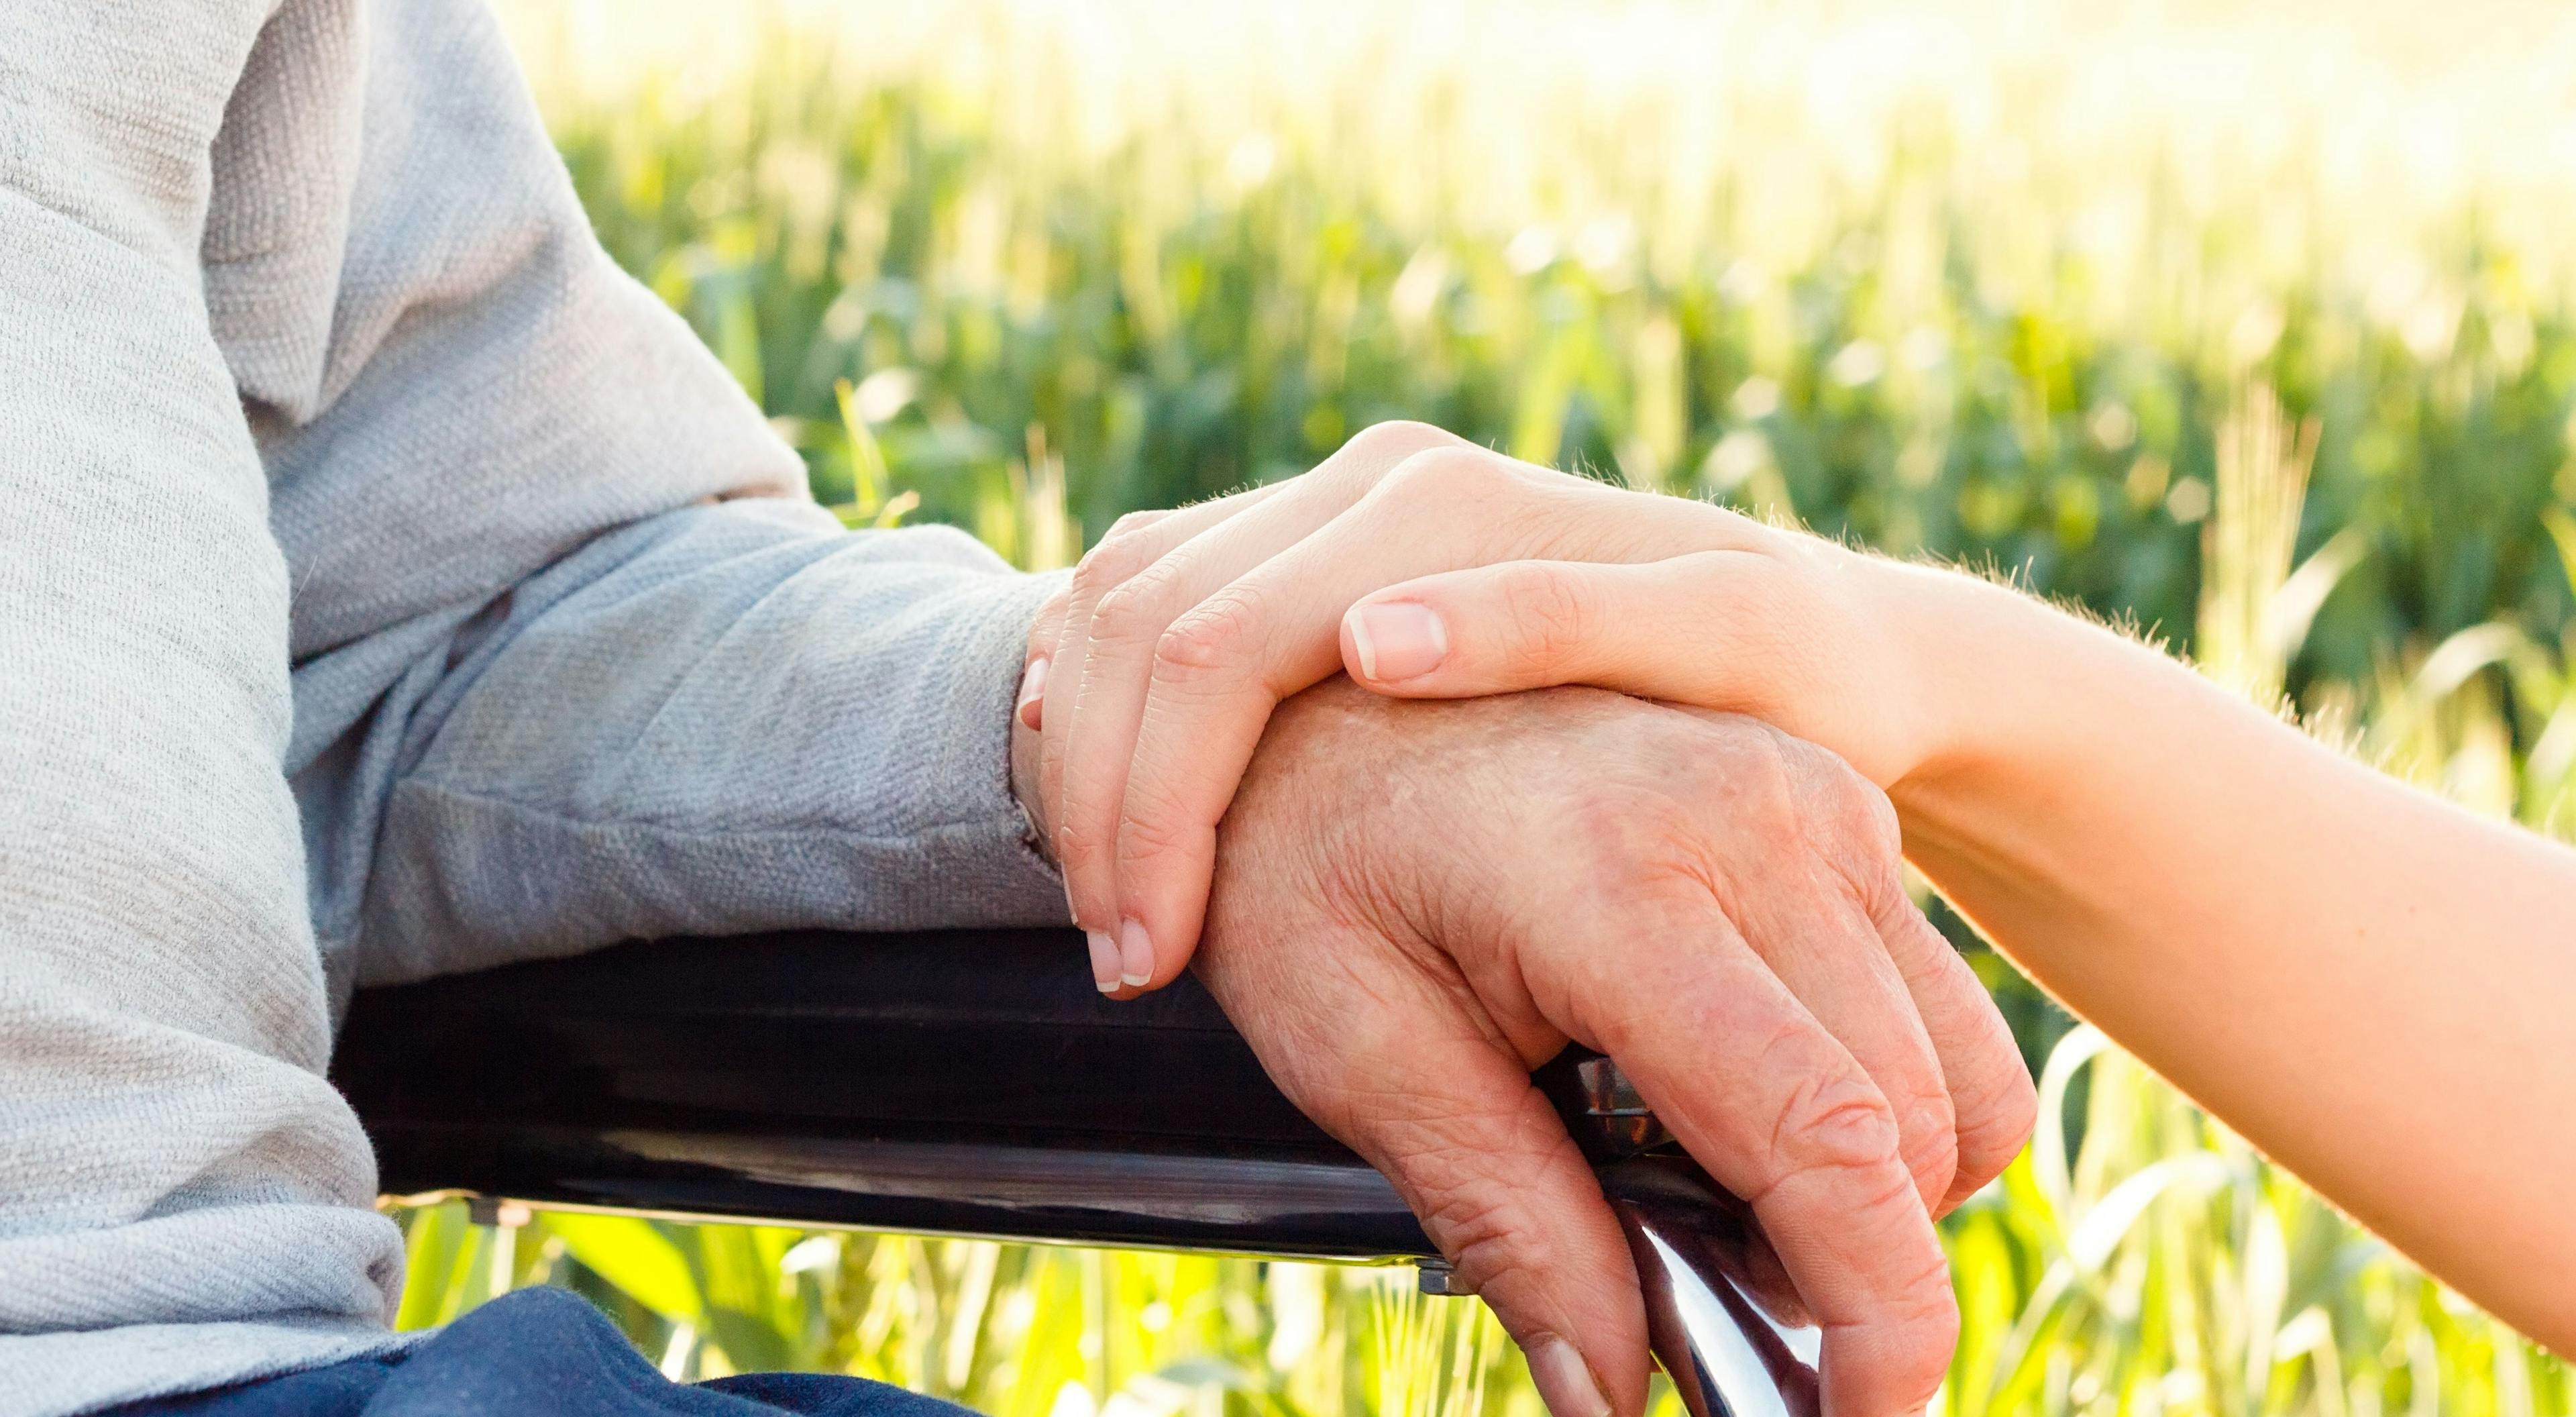 Helping Caregivers: Advice, Support and More